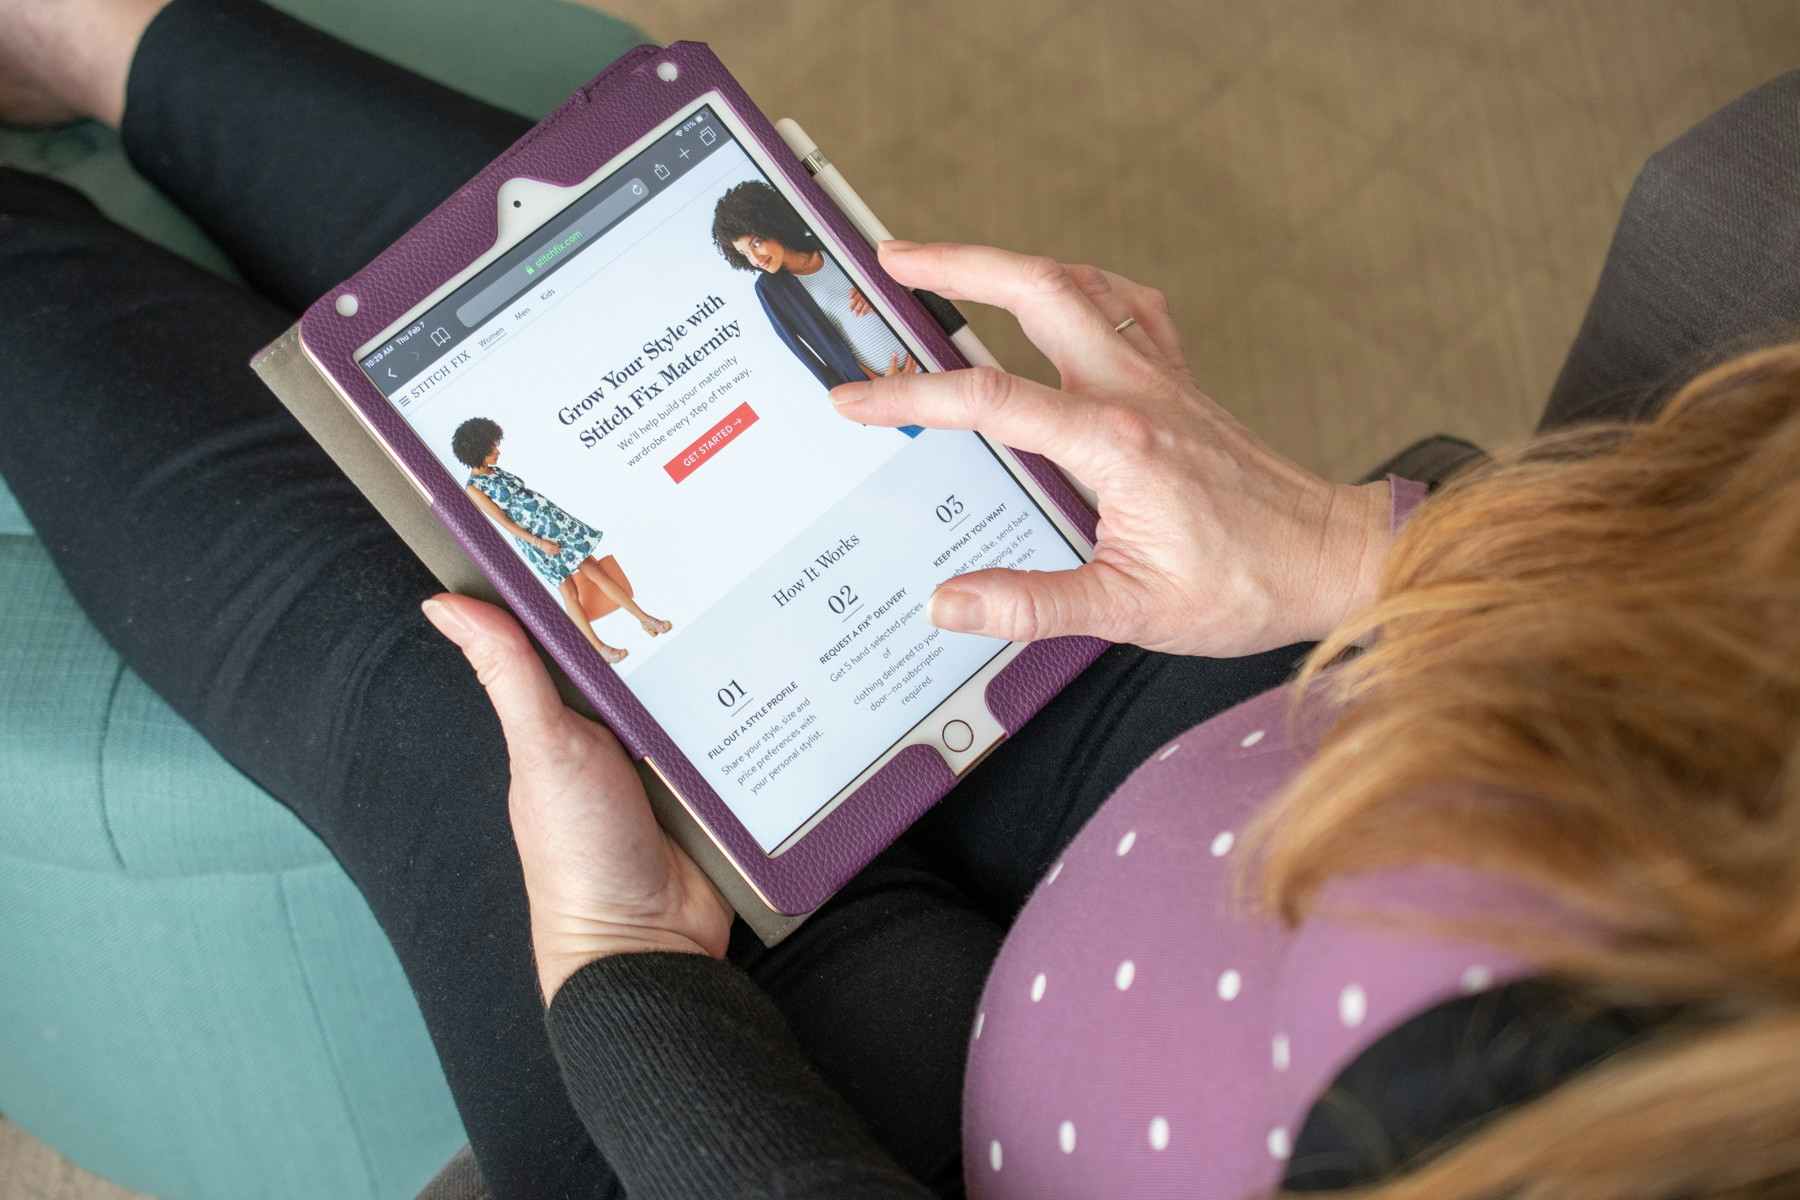 A pregnant woman viewing StitchFix website on a mobile tablet.